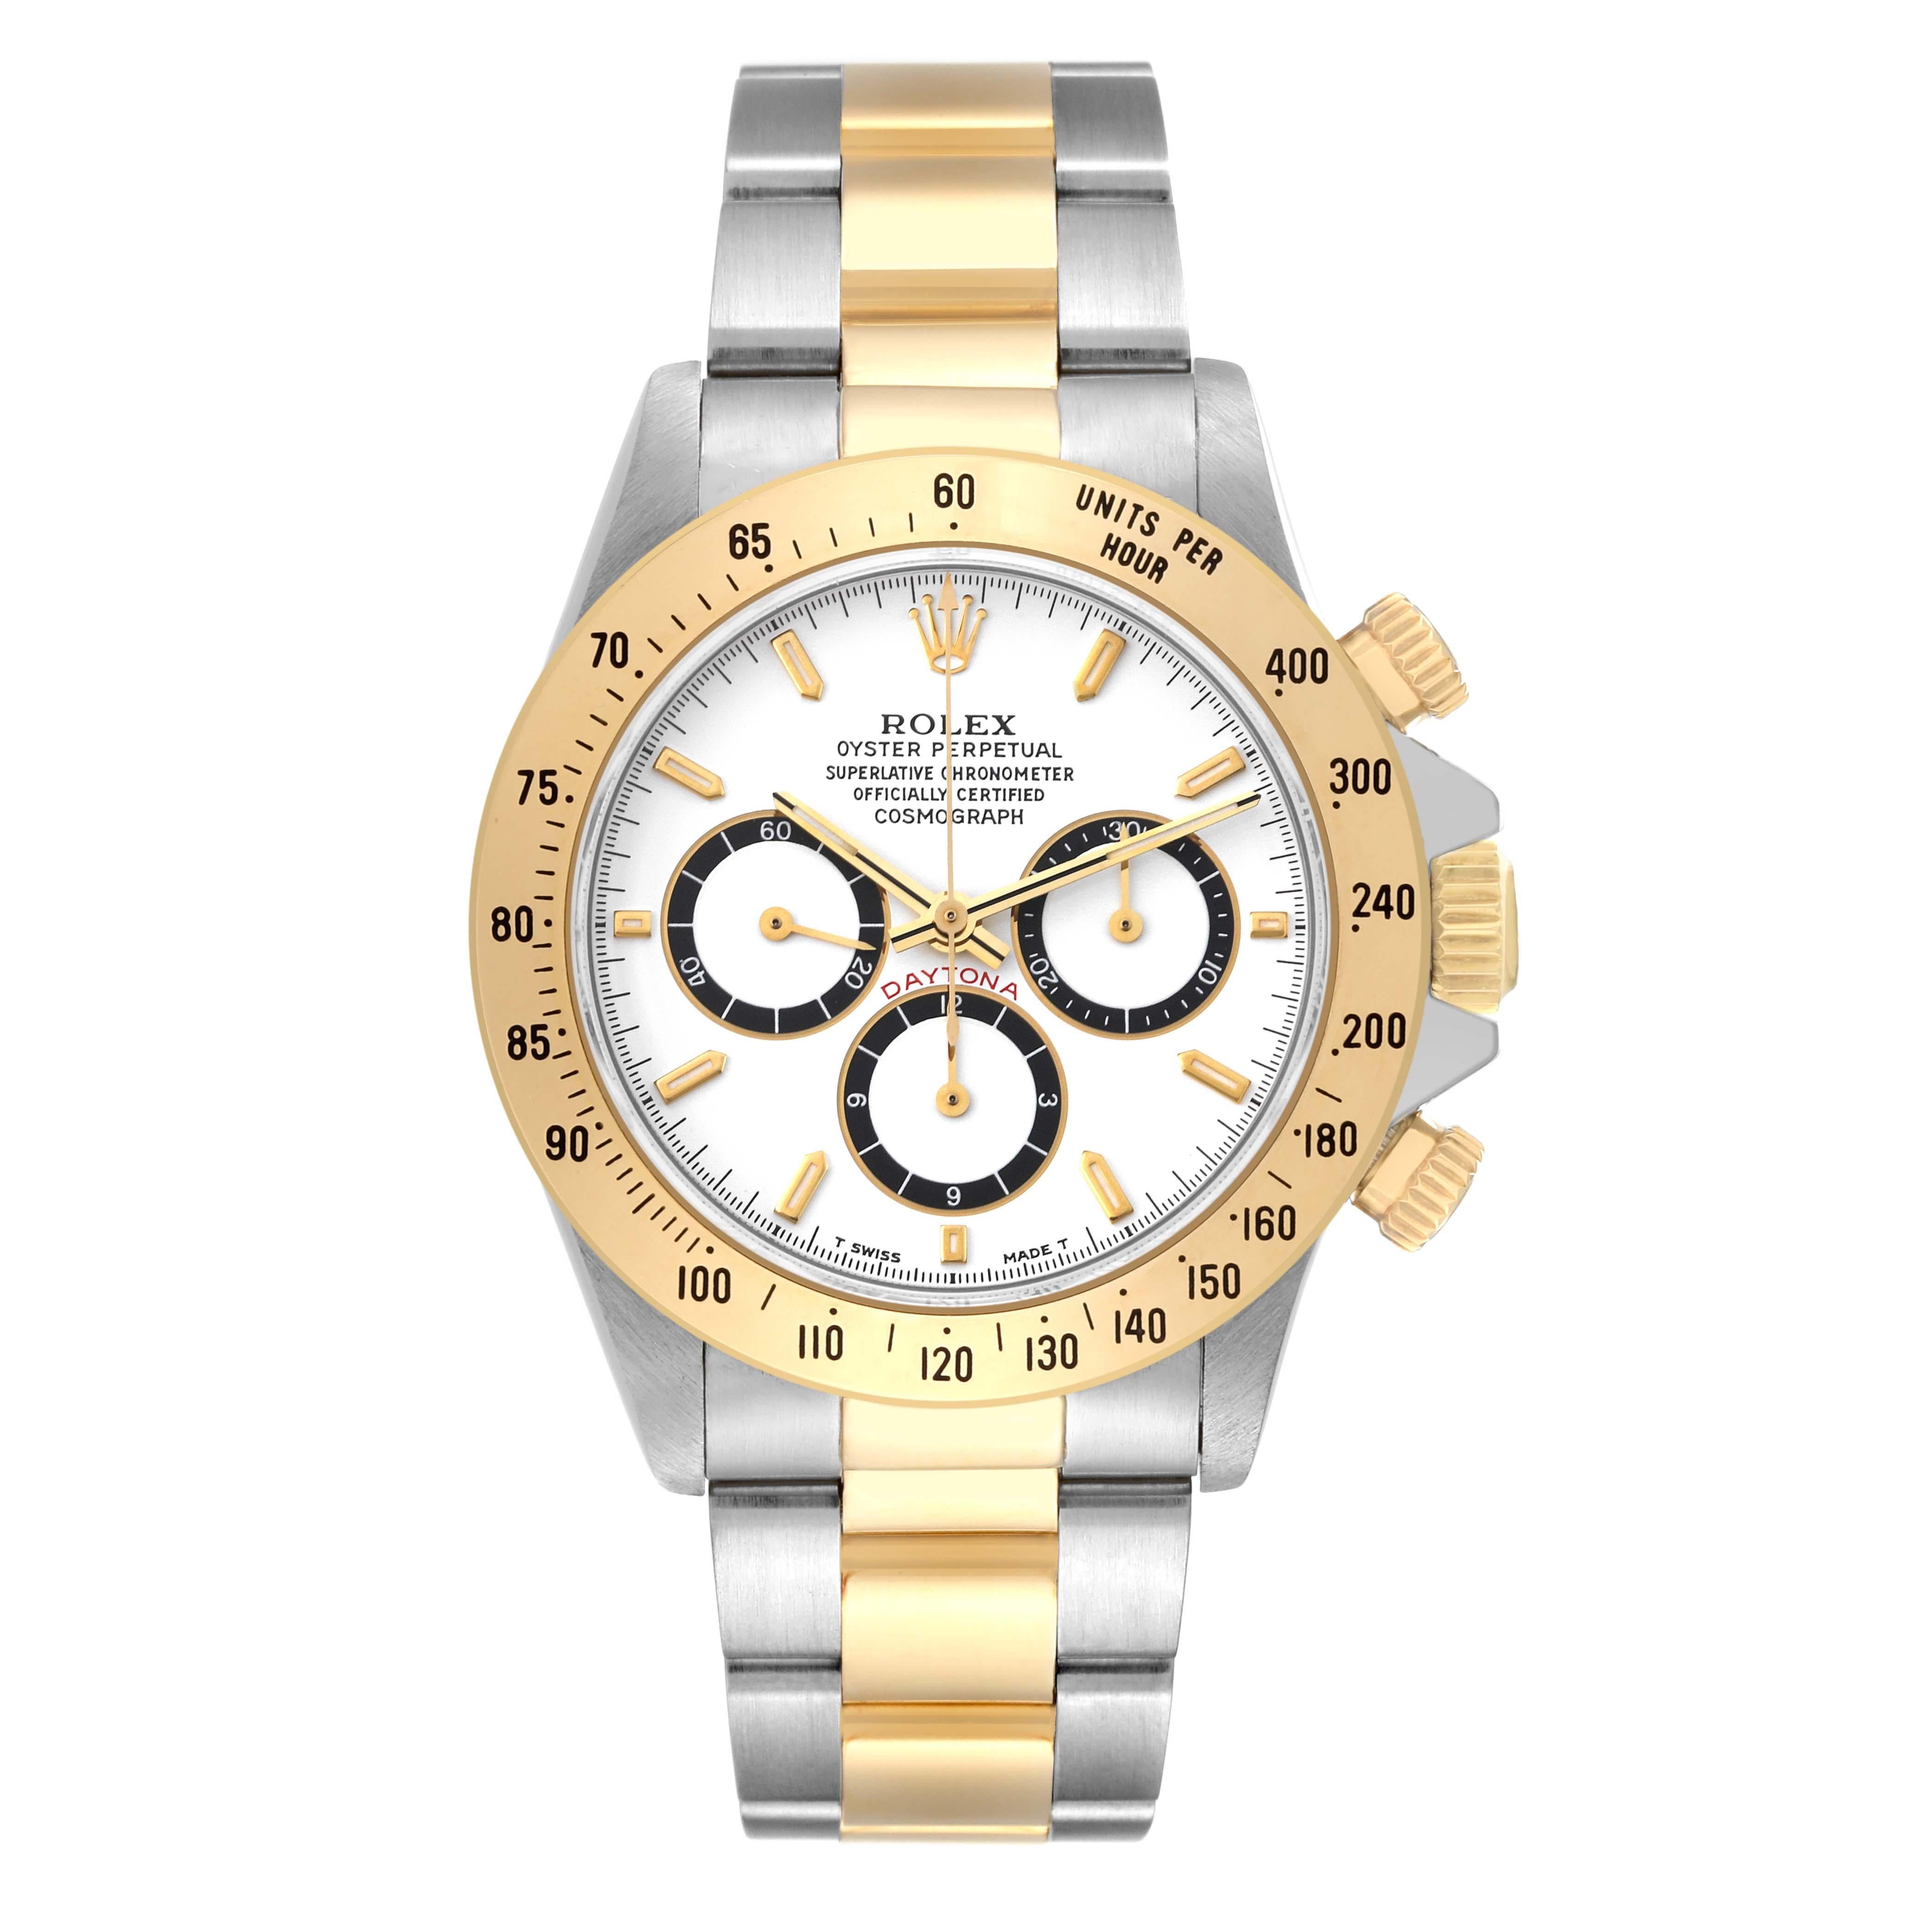 Rolex Daytona Steel Yellow Gold Zenith Movement Mens Watch 16523. Officially certified chronometer automatic self-winding movement. Zenith based chronograph. Stainless steel and 18K yellow gold case 40.0 mm in diameter. Special screw-down push